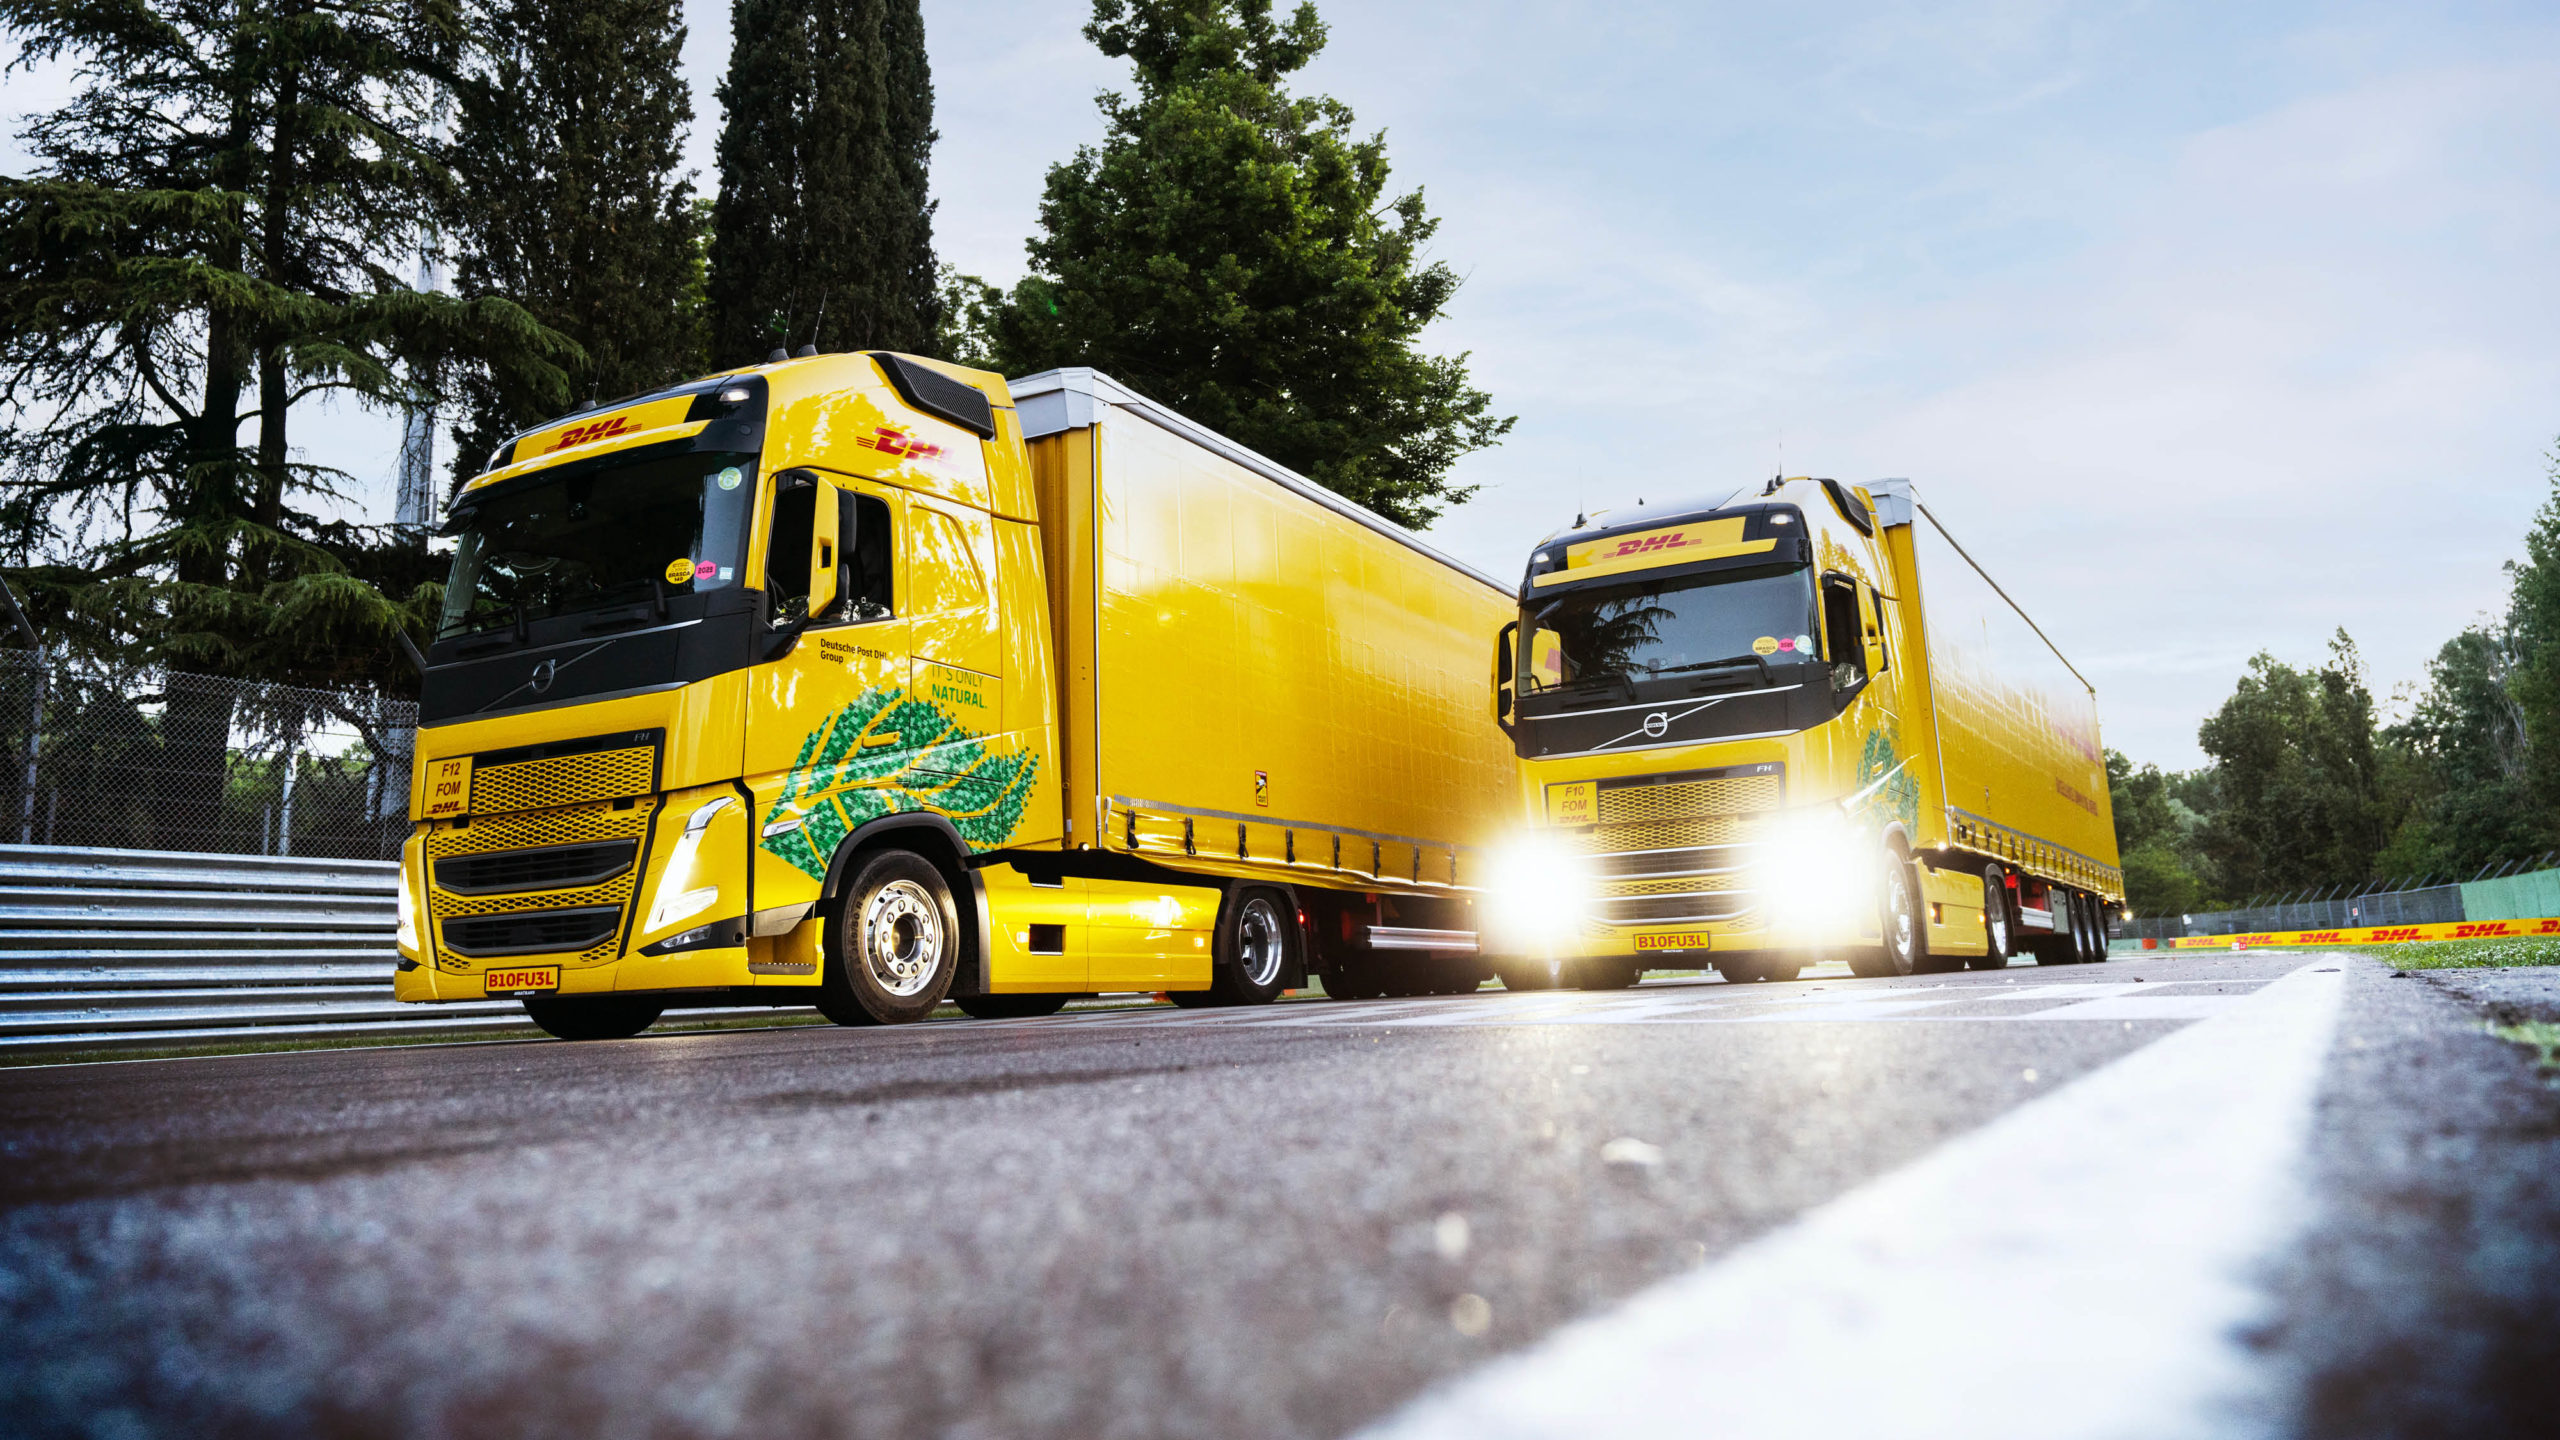 Biofuel for Formula 1: DHL Brings Green Logistics to the Racetrack